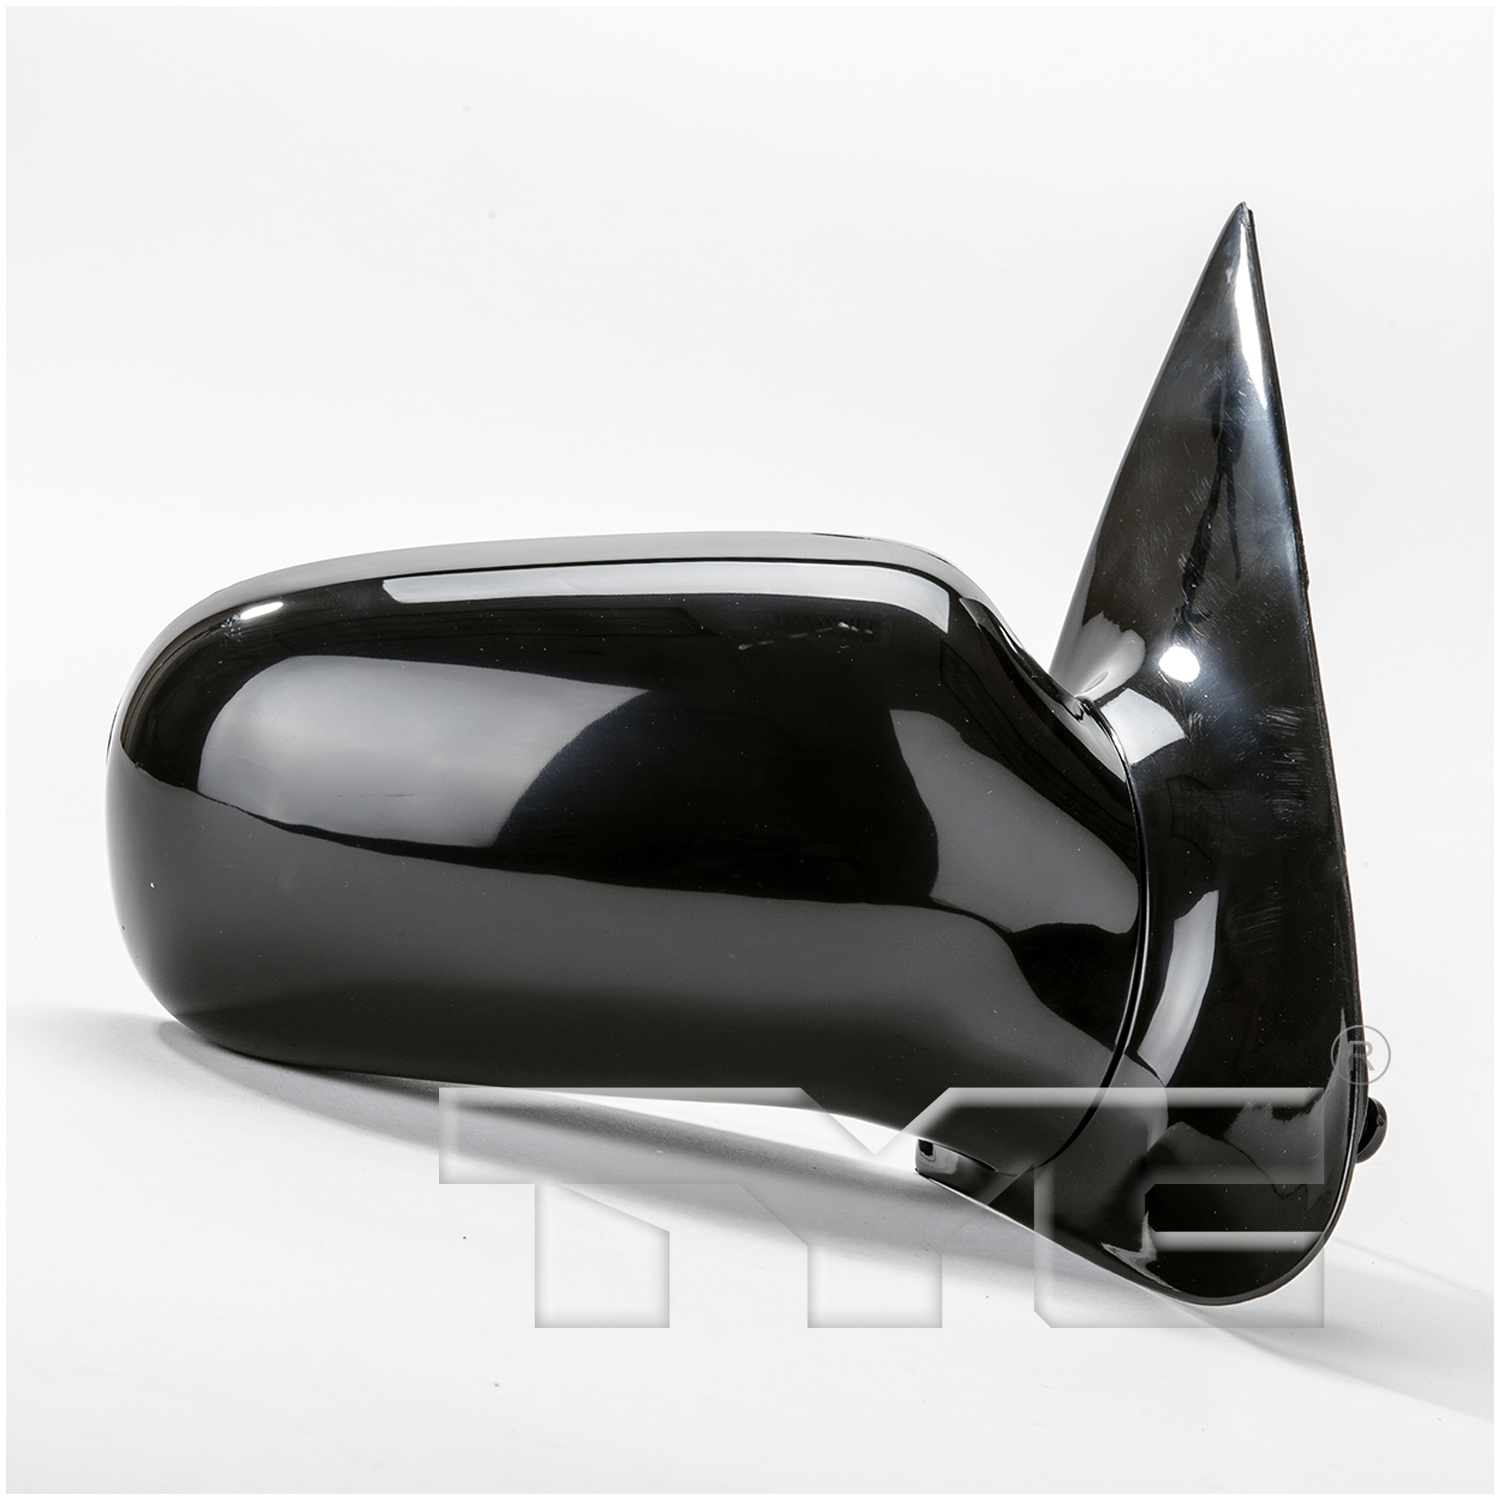 Aftermarket MIRRORS for PONTIAC - SUNFIRE, SUNFIRE,95-04,RT Mirror outside rear view